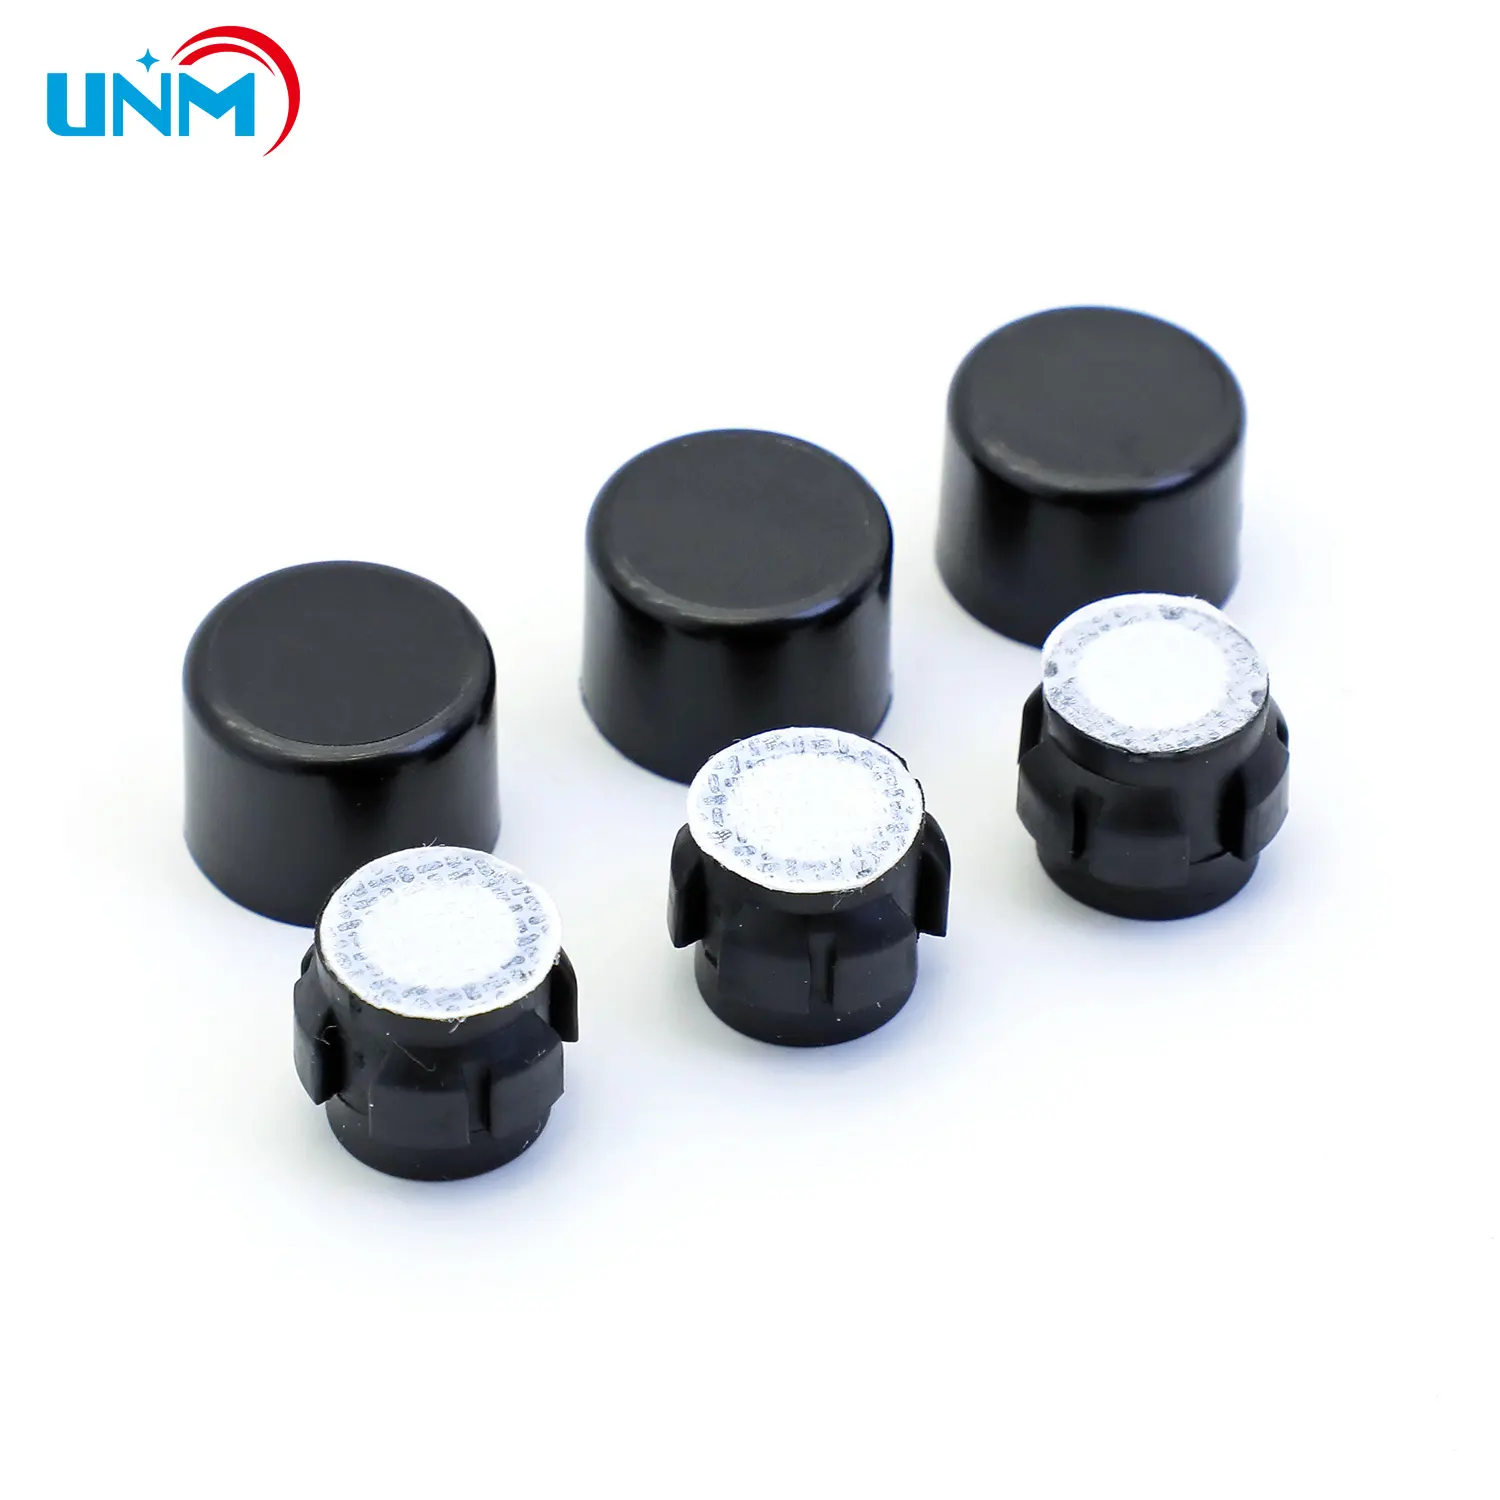 UNM IP66 IP67 Large Air Permeability Gray Vents Cap for Automotive Rear Lamp Application